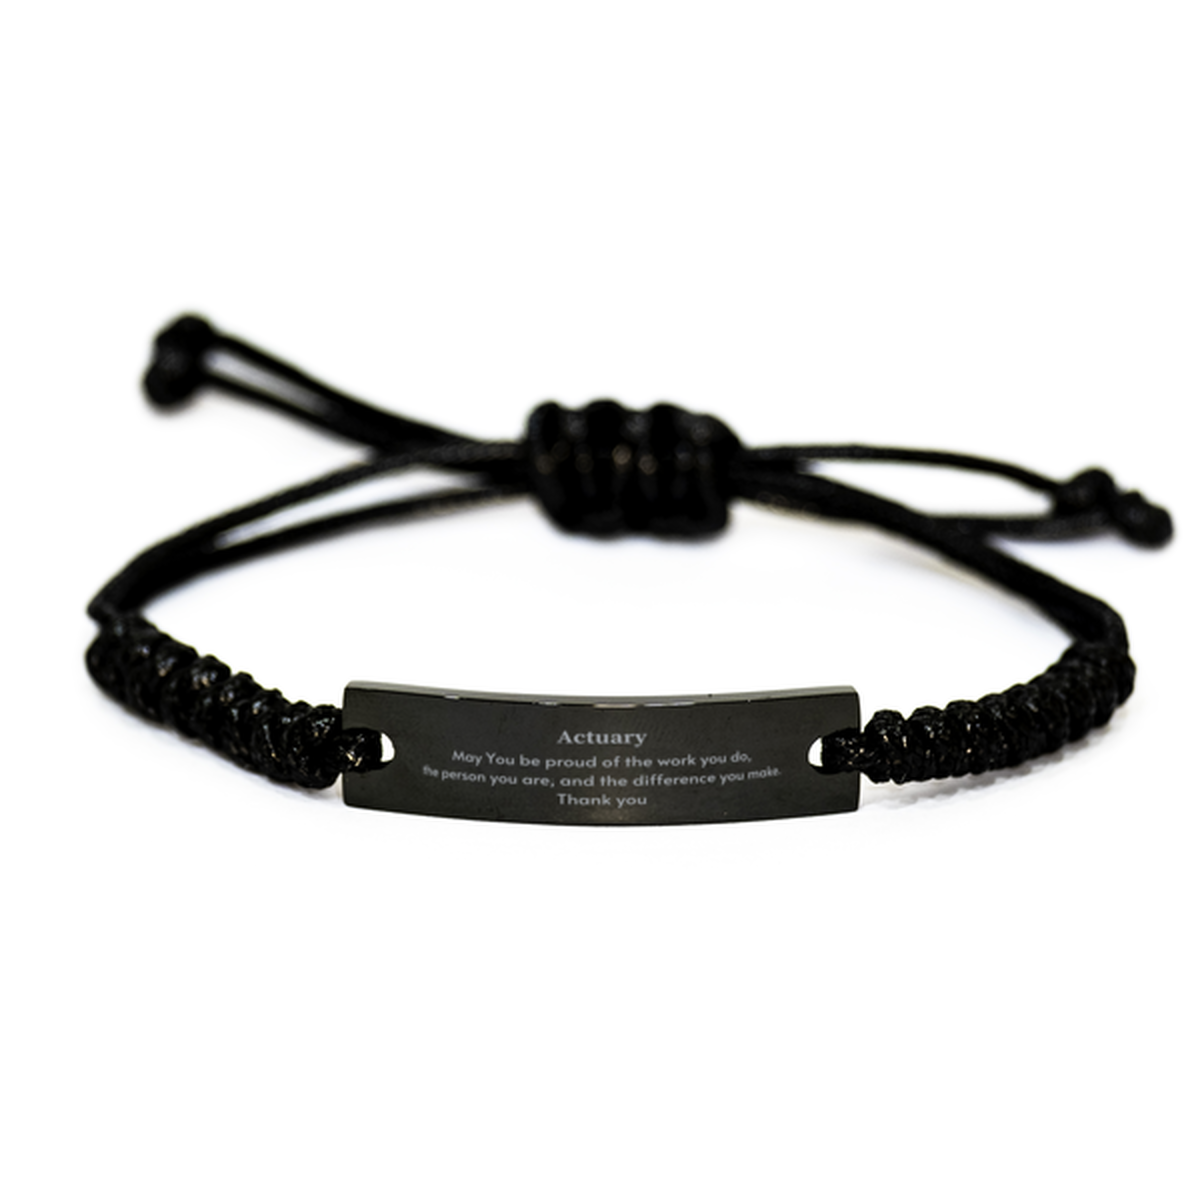 Heartwarming Black Rope Bracelet Retirement Coworkers Gifts for Actuary, Actuary May You be proud of the work you do, the person you are Gifts for Boss Men Women Friends